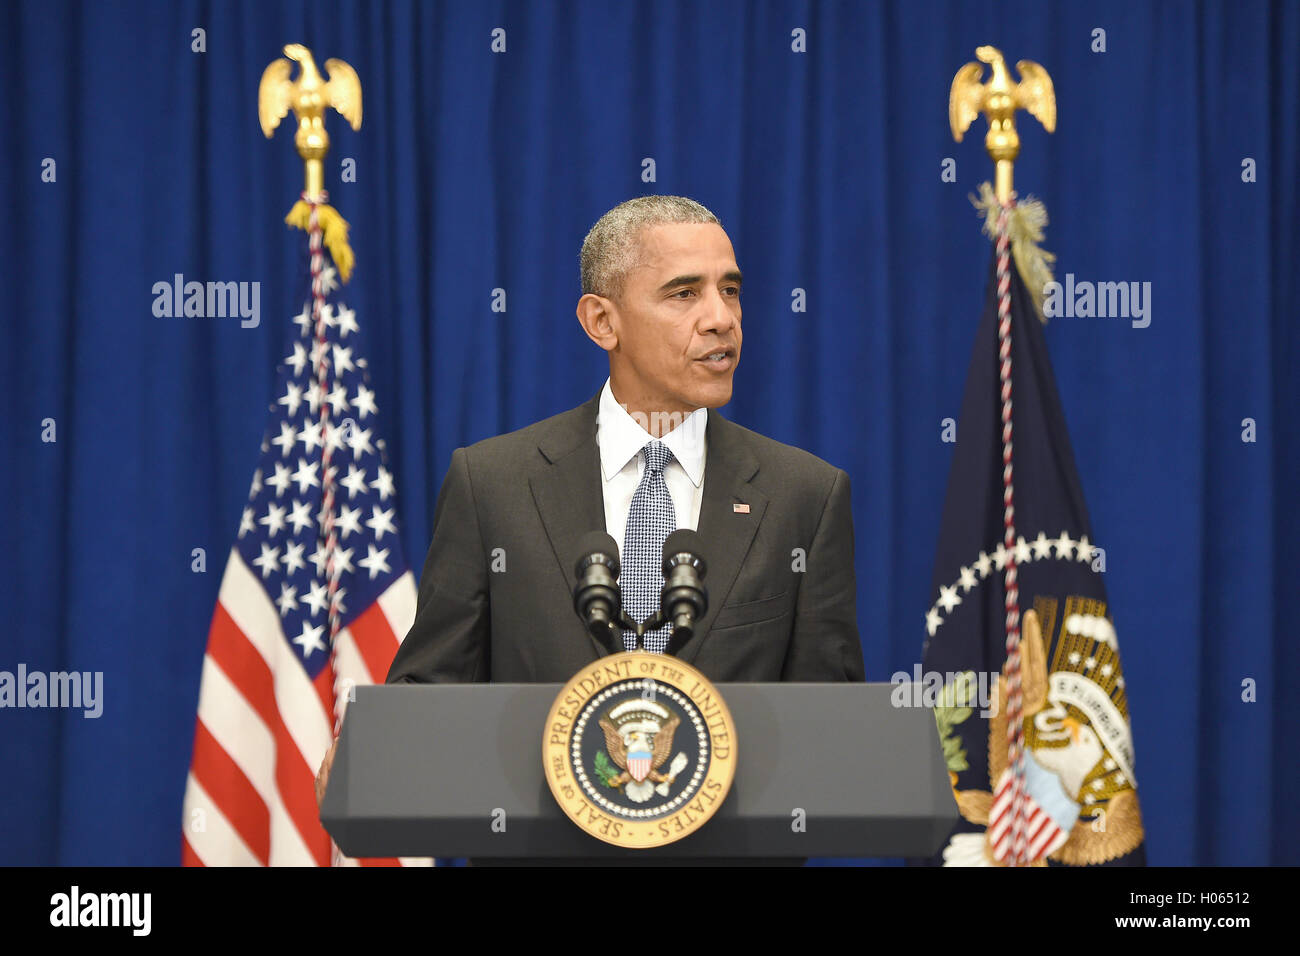 United States President Barack Obama holds a press conference about the recent bombing in the New York region at the Lotte New York Palace Hotel in New York, New York, on September 19, 2016. On the evening of September 17, 2016, a bomb placed in a dumpster exploded in lower Manhattan injuring at least 29 people.  Credit: Anthony Behar / Pool via CNP /MediaPunch Stock Photo